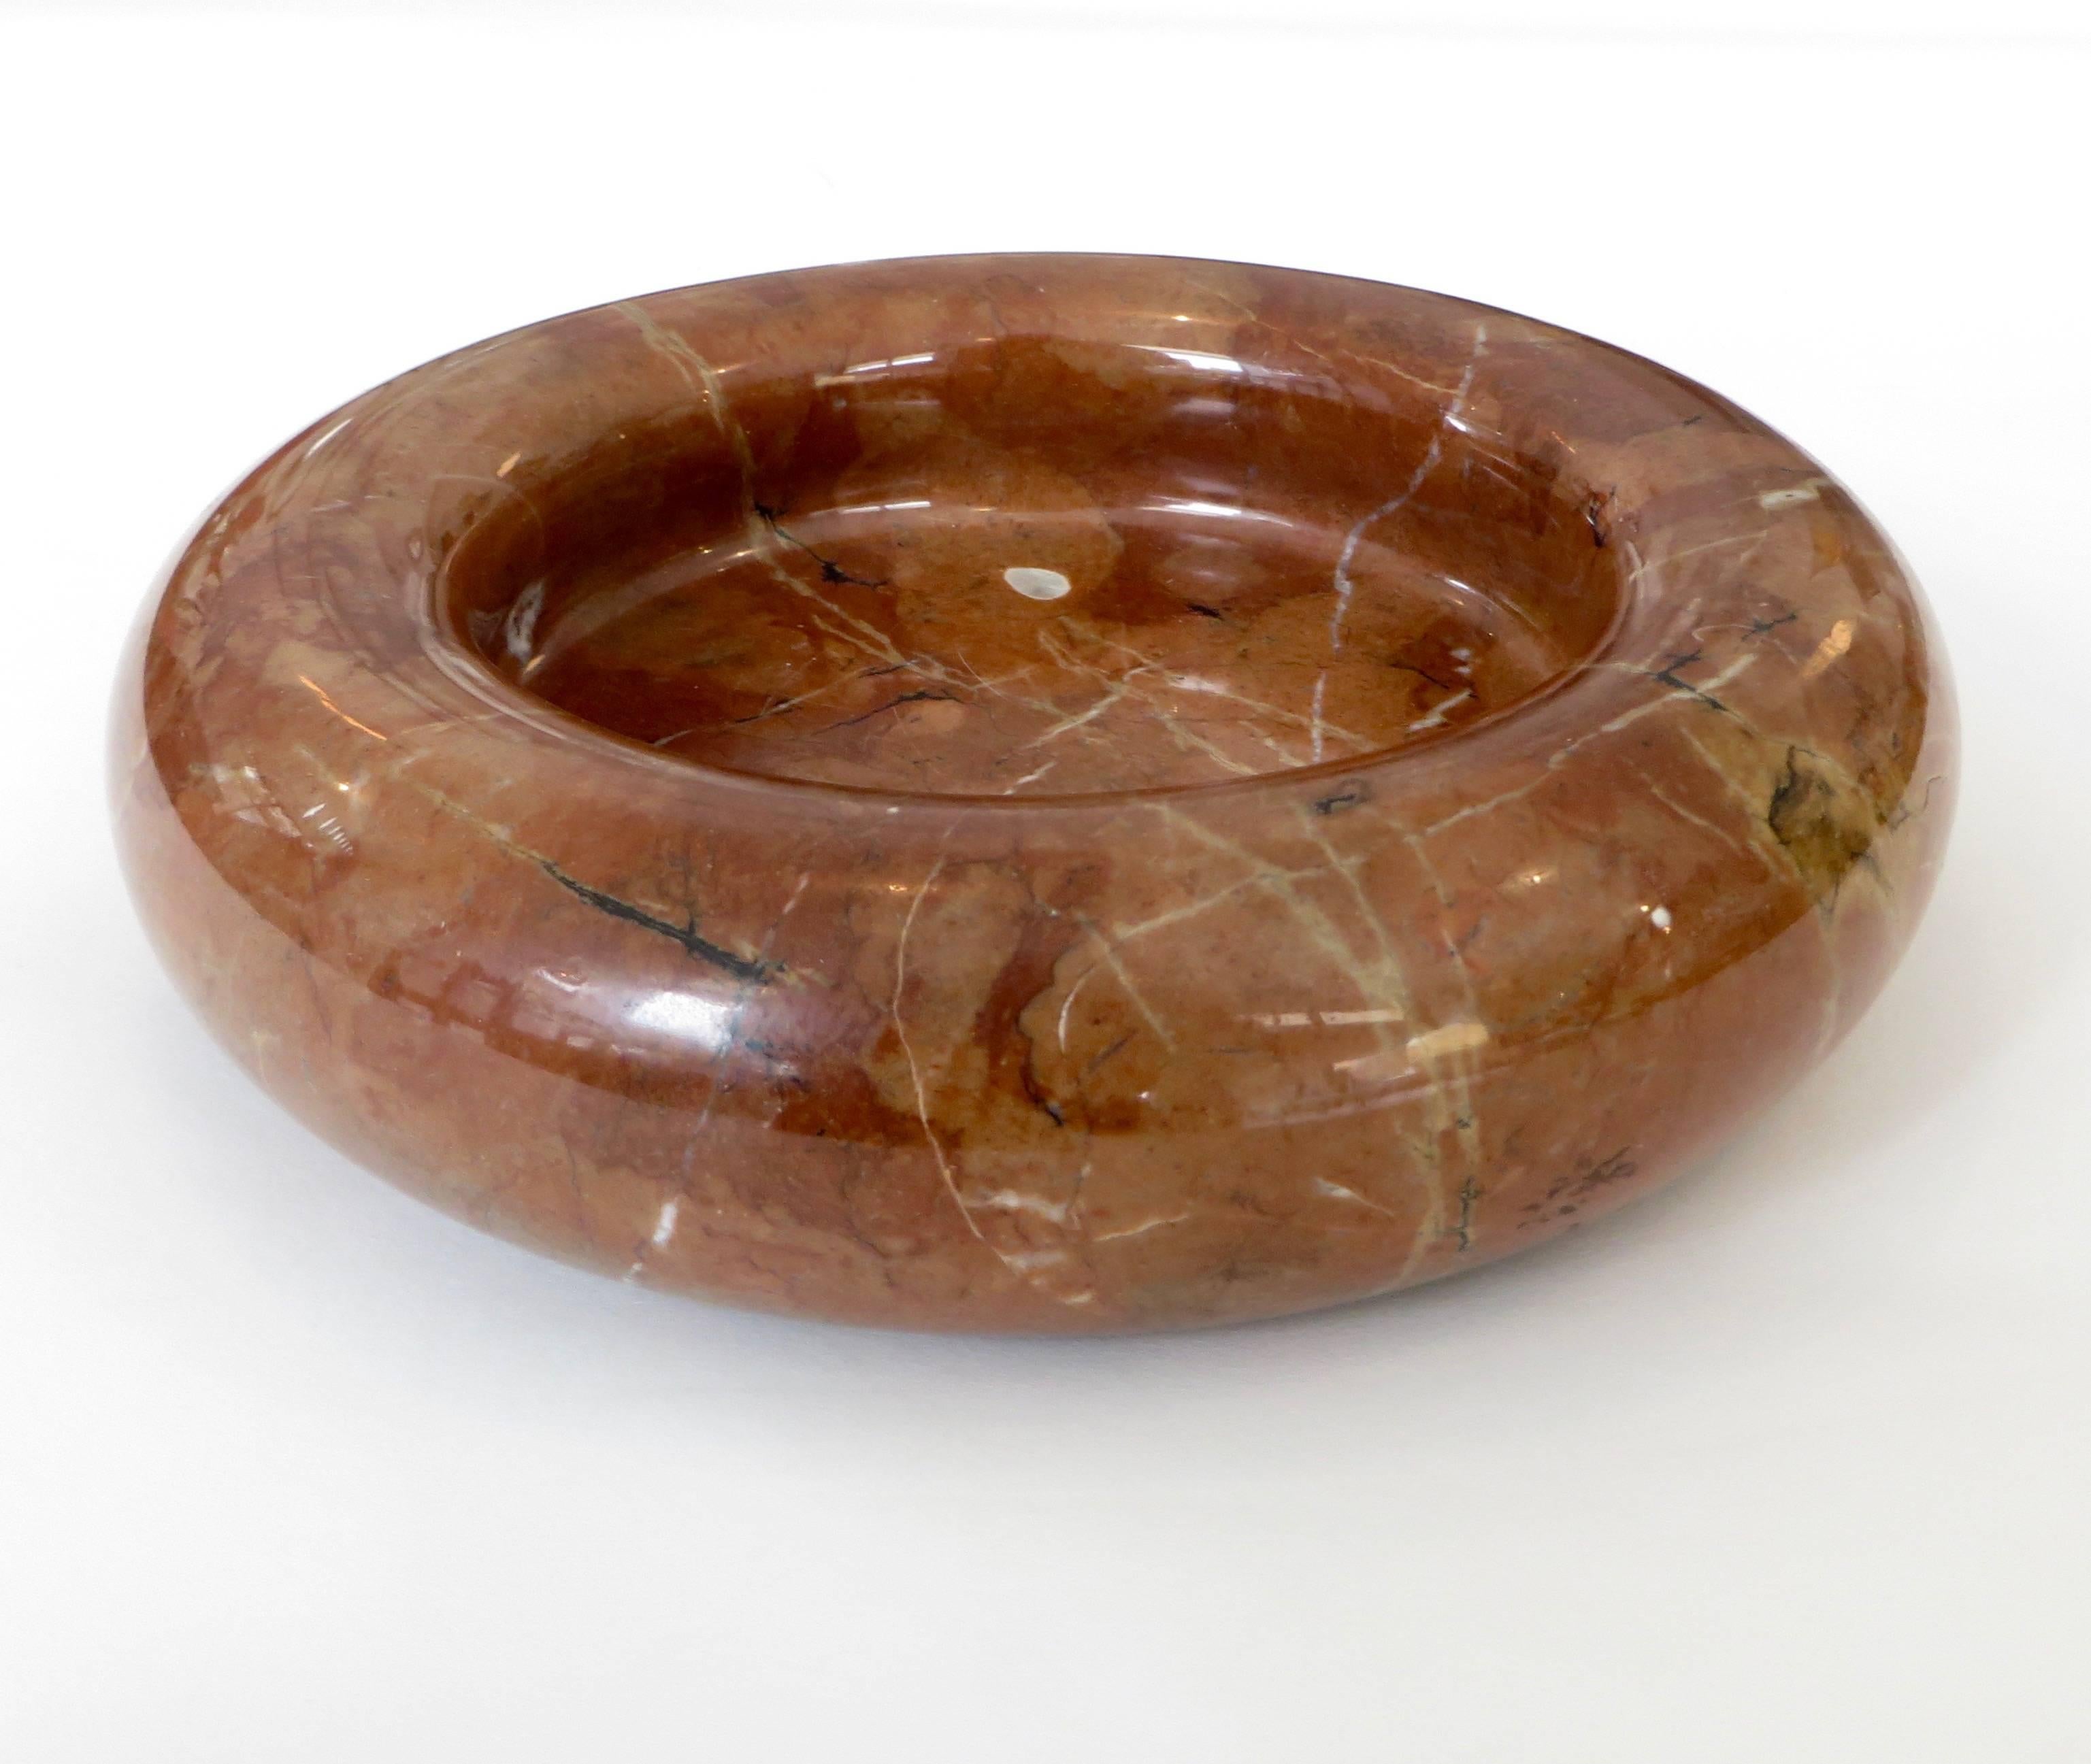 Italian iconic red marble vide poche or bowl by Segio Asti for Up & Up Atelier International. 
No chips or cracks, polished and in perfect condition. 
A great place for keys or desktop items or just decoration.
 